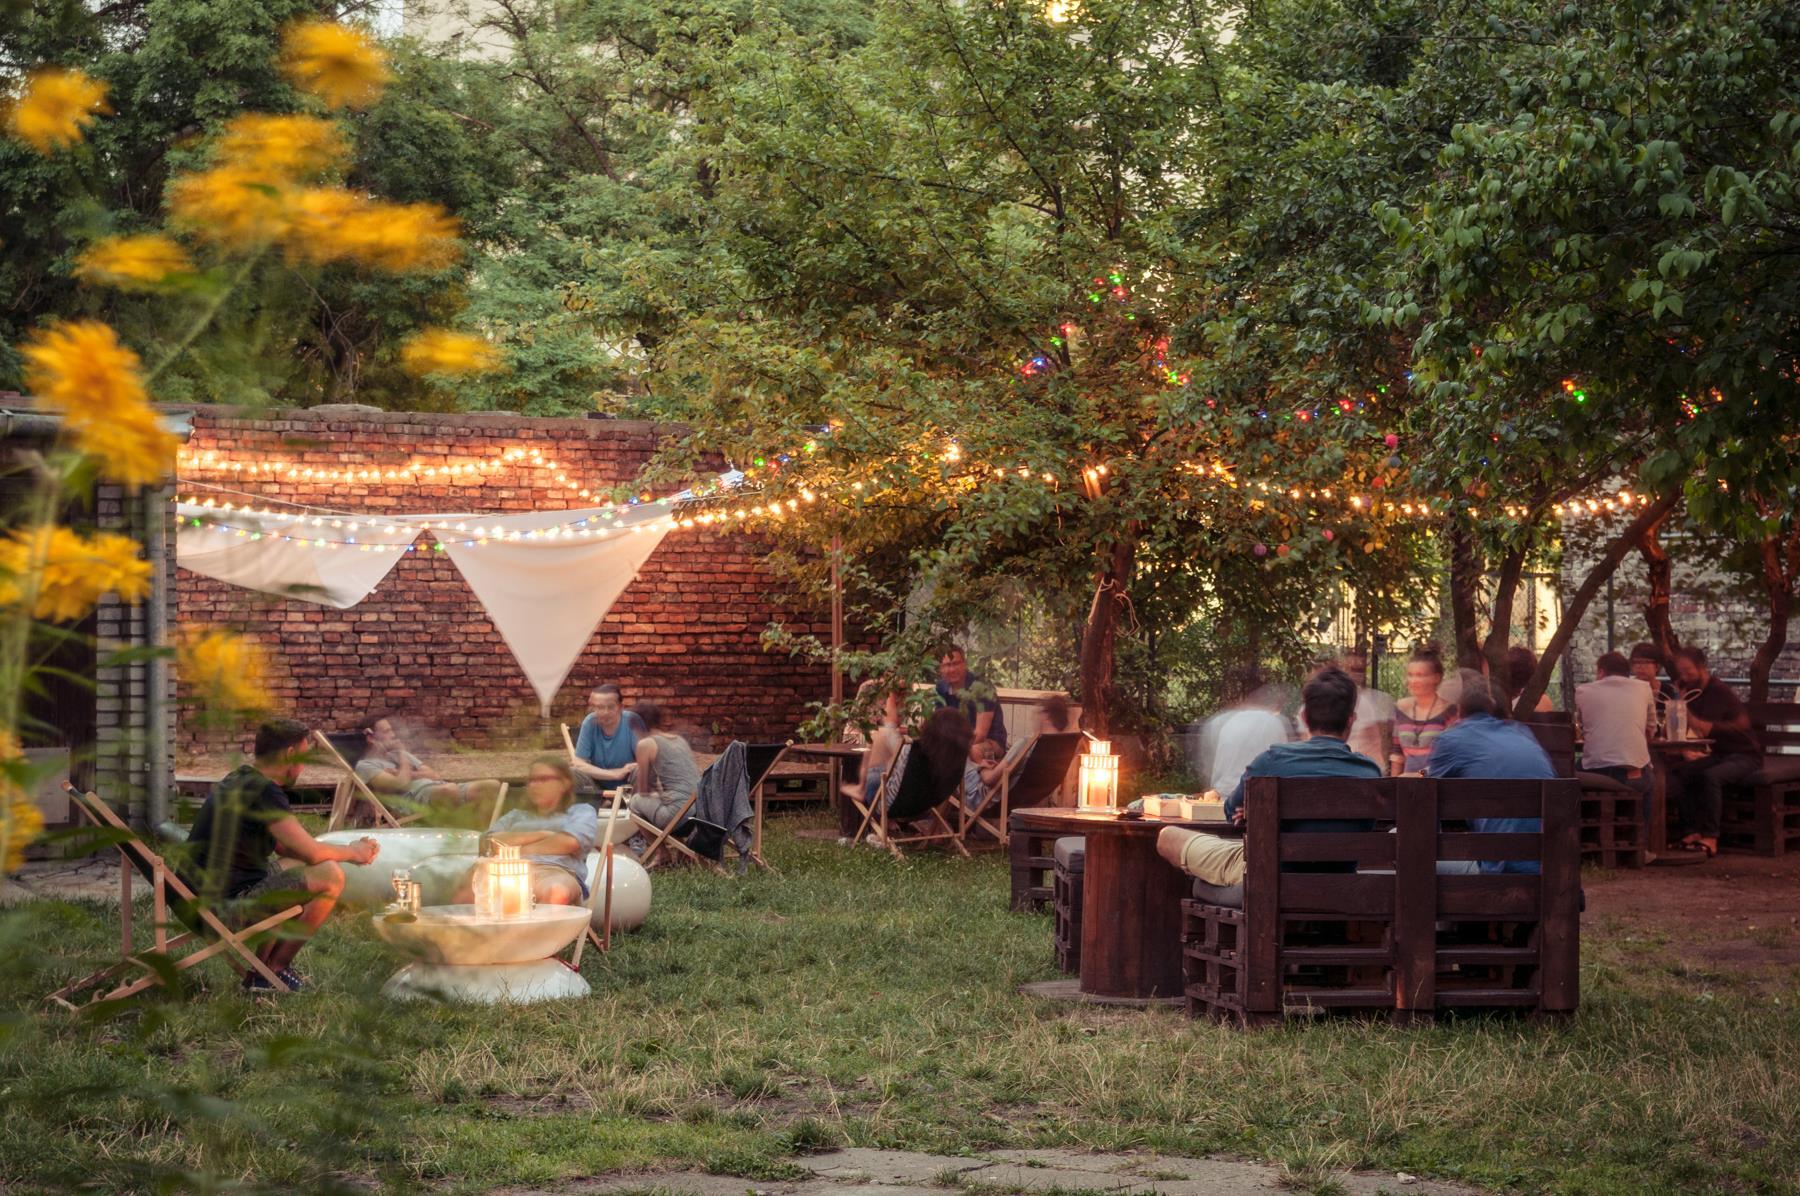 Pull up a chair in Bar Wieczorny's cute backyard, and if you're feeling brave order up a "Polish storm"